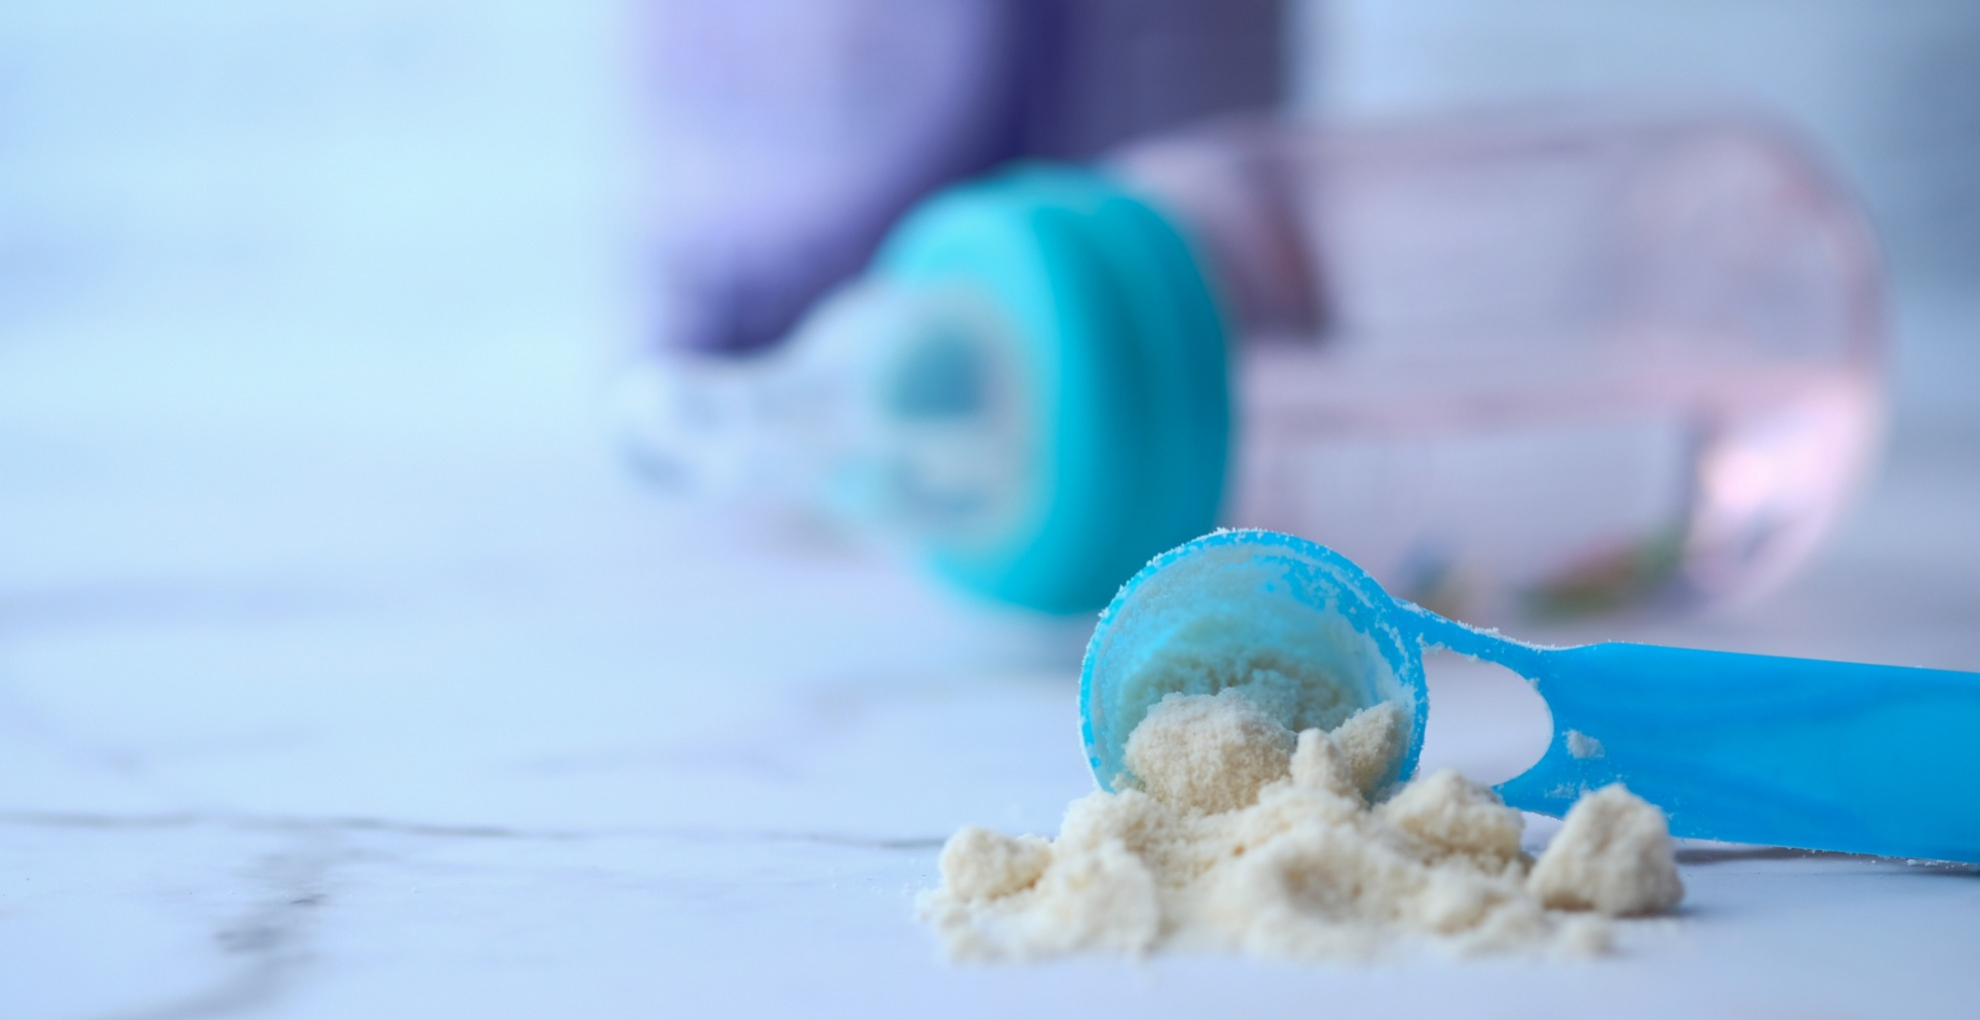 Why corn syrup is so common in infant formula to begin with remains unclear.